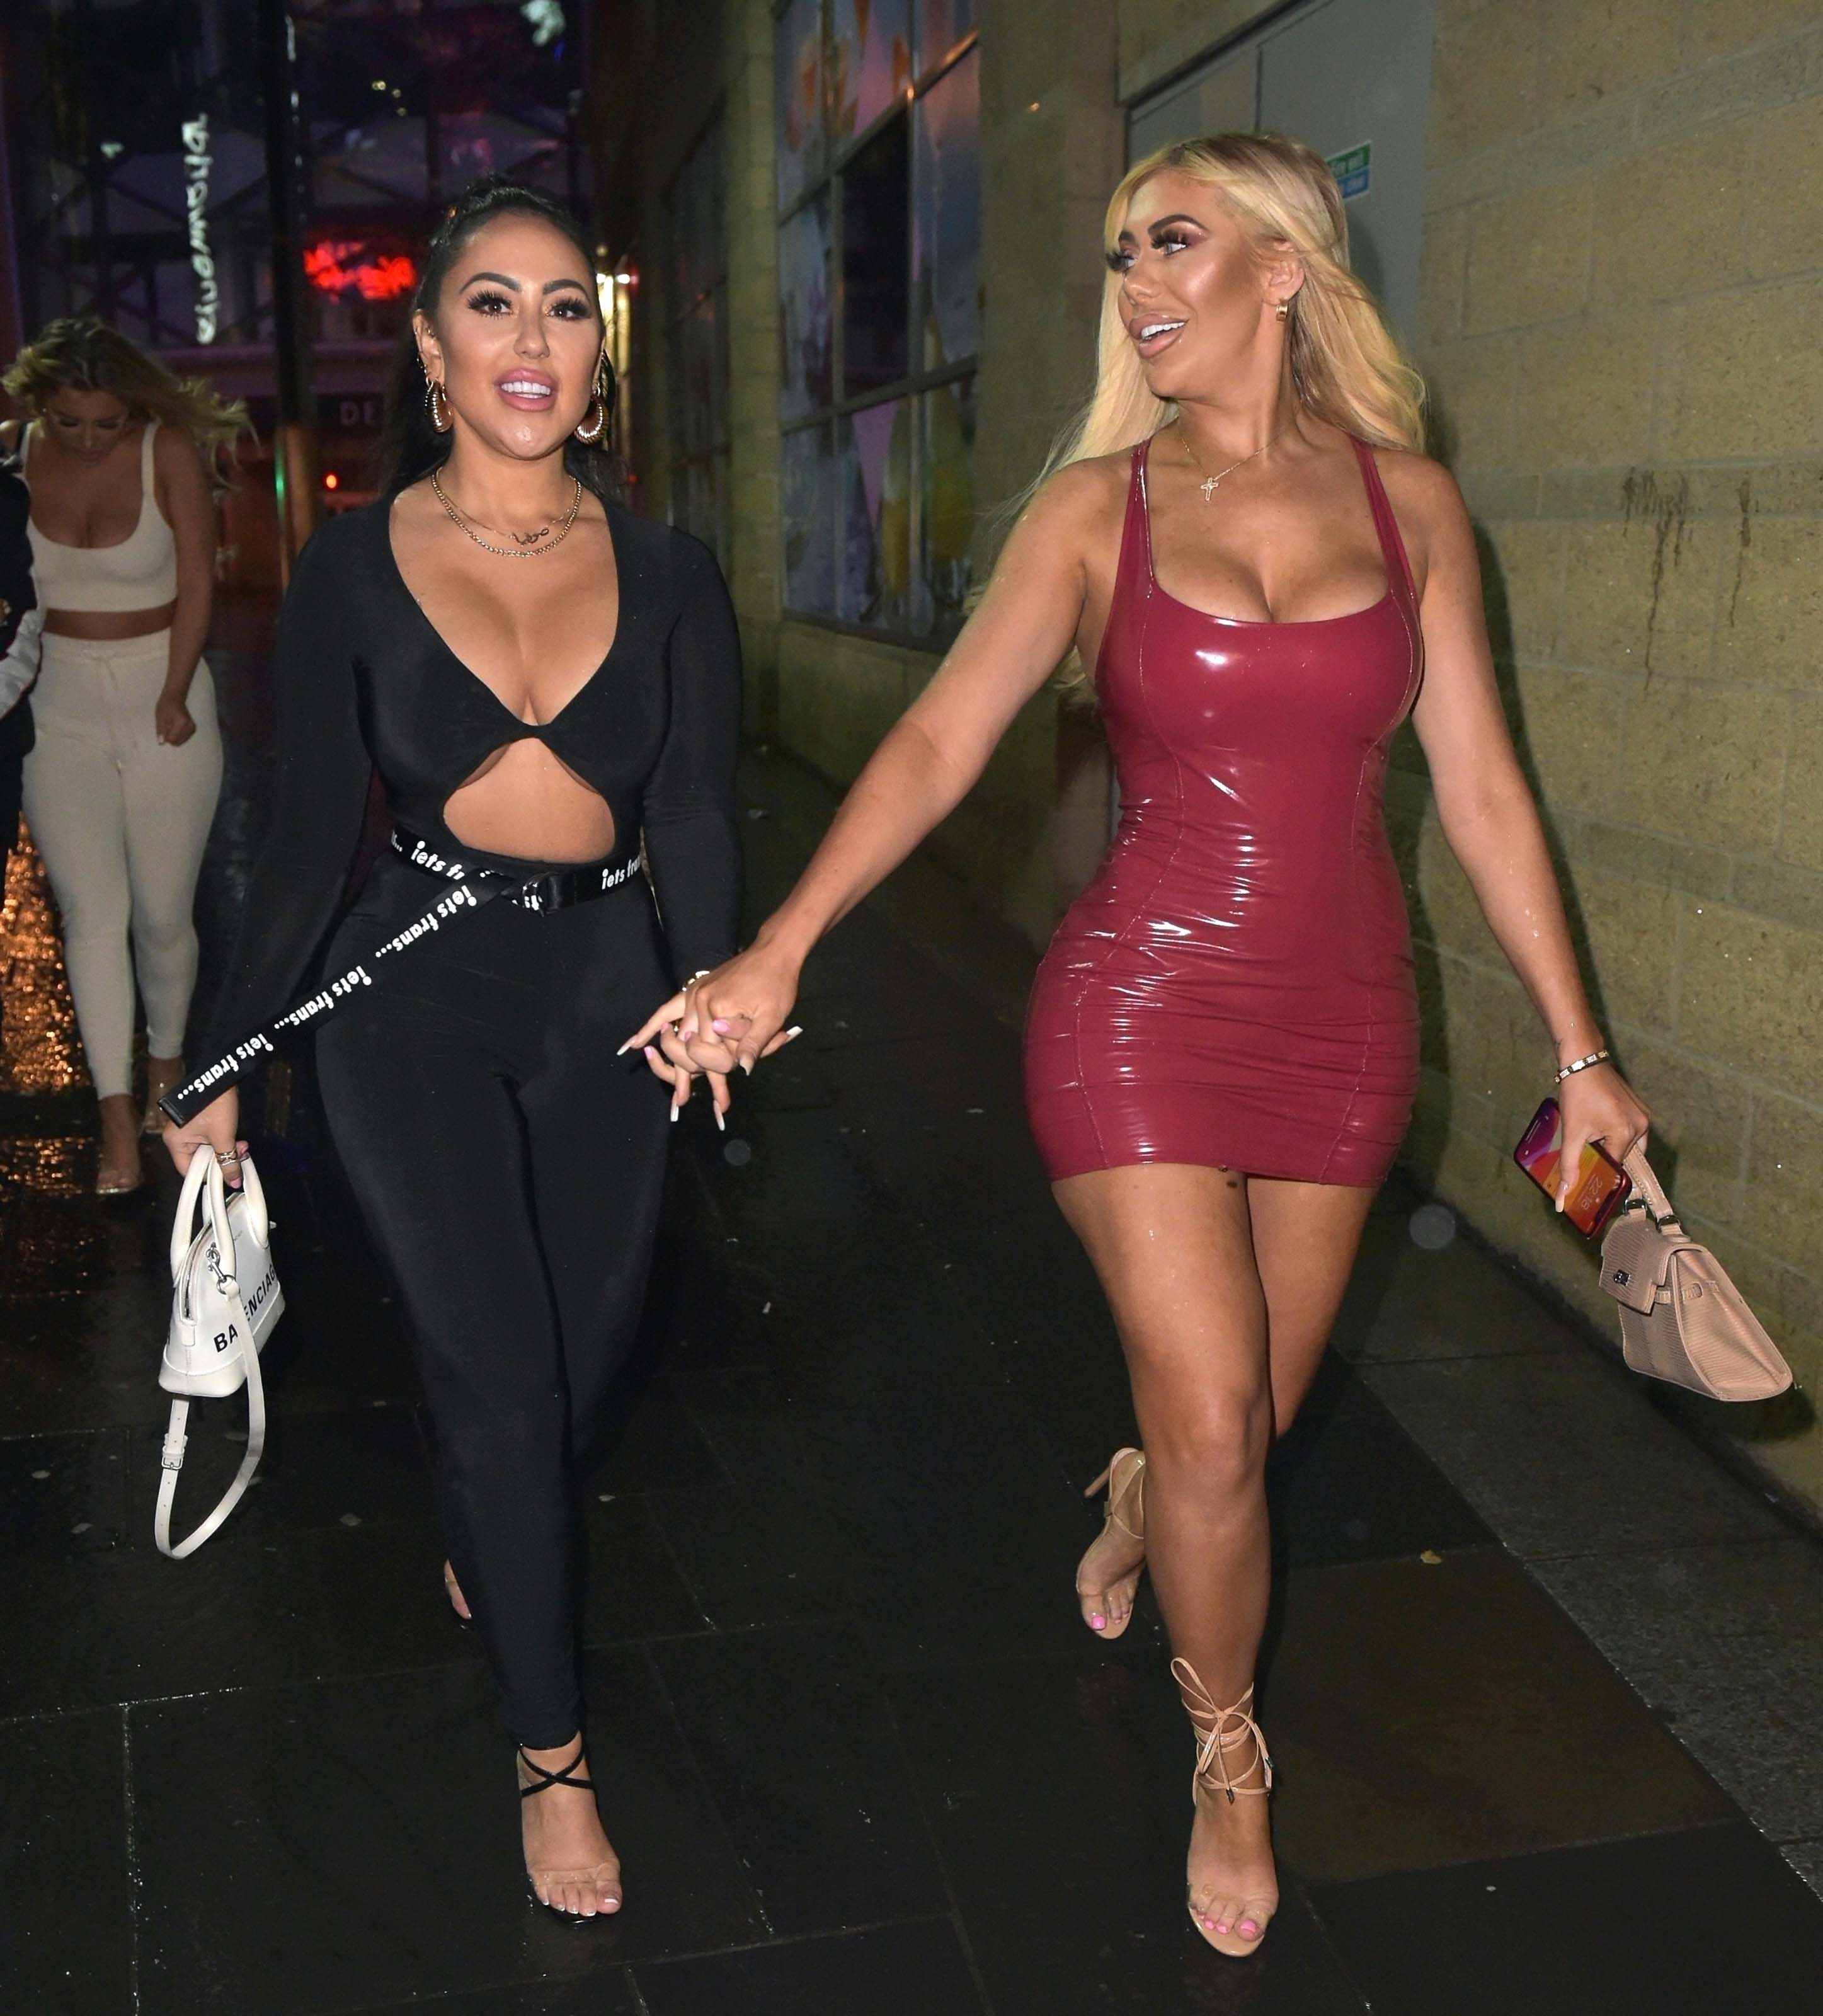 Bethan Kershaw, Chloe Ferry and Sophie Kasaei hit the Toon